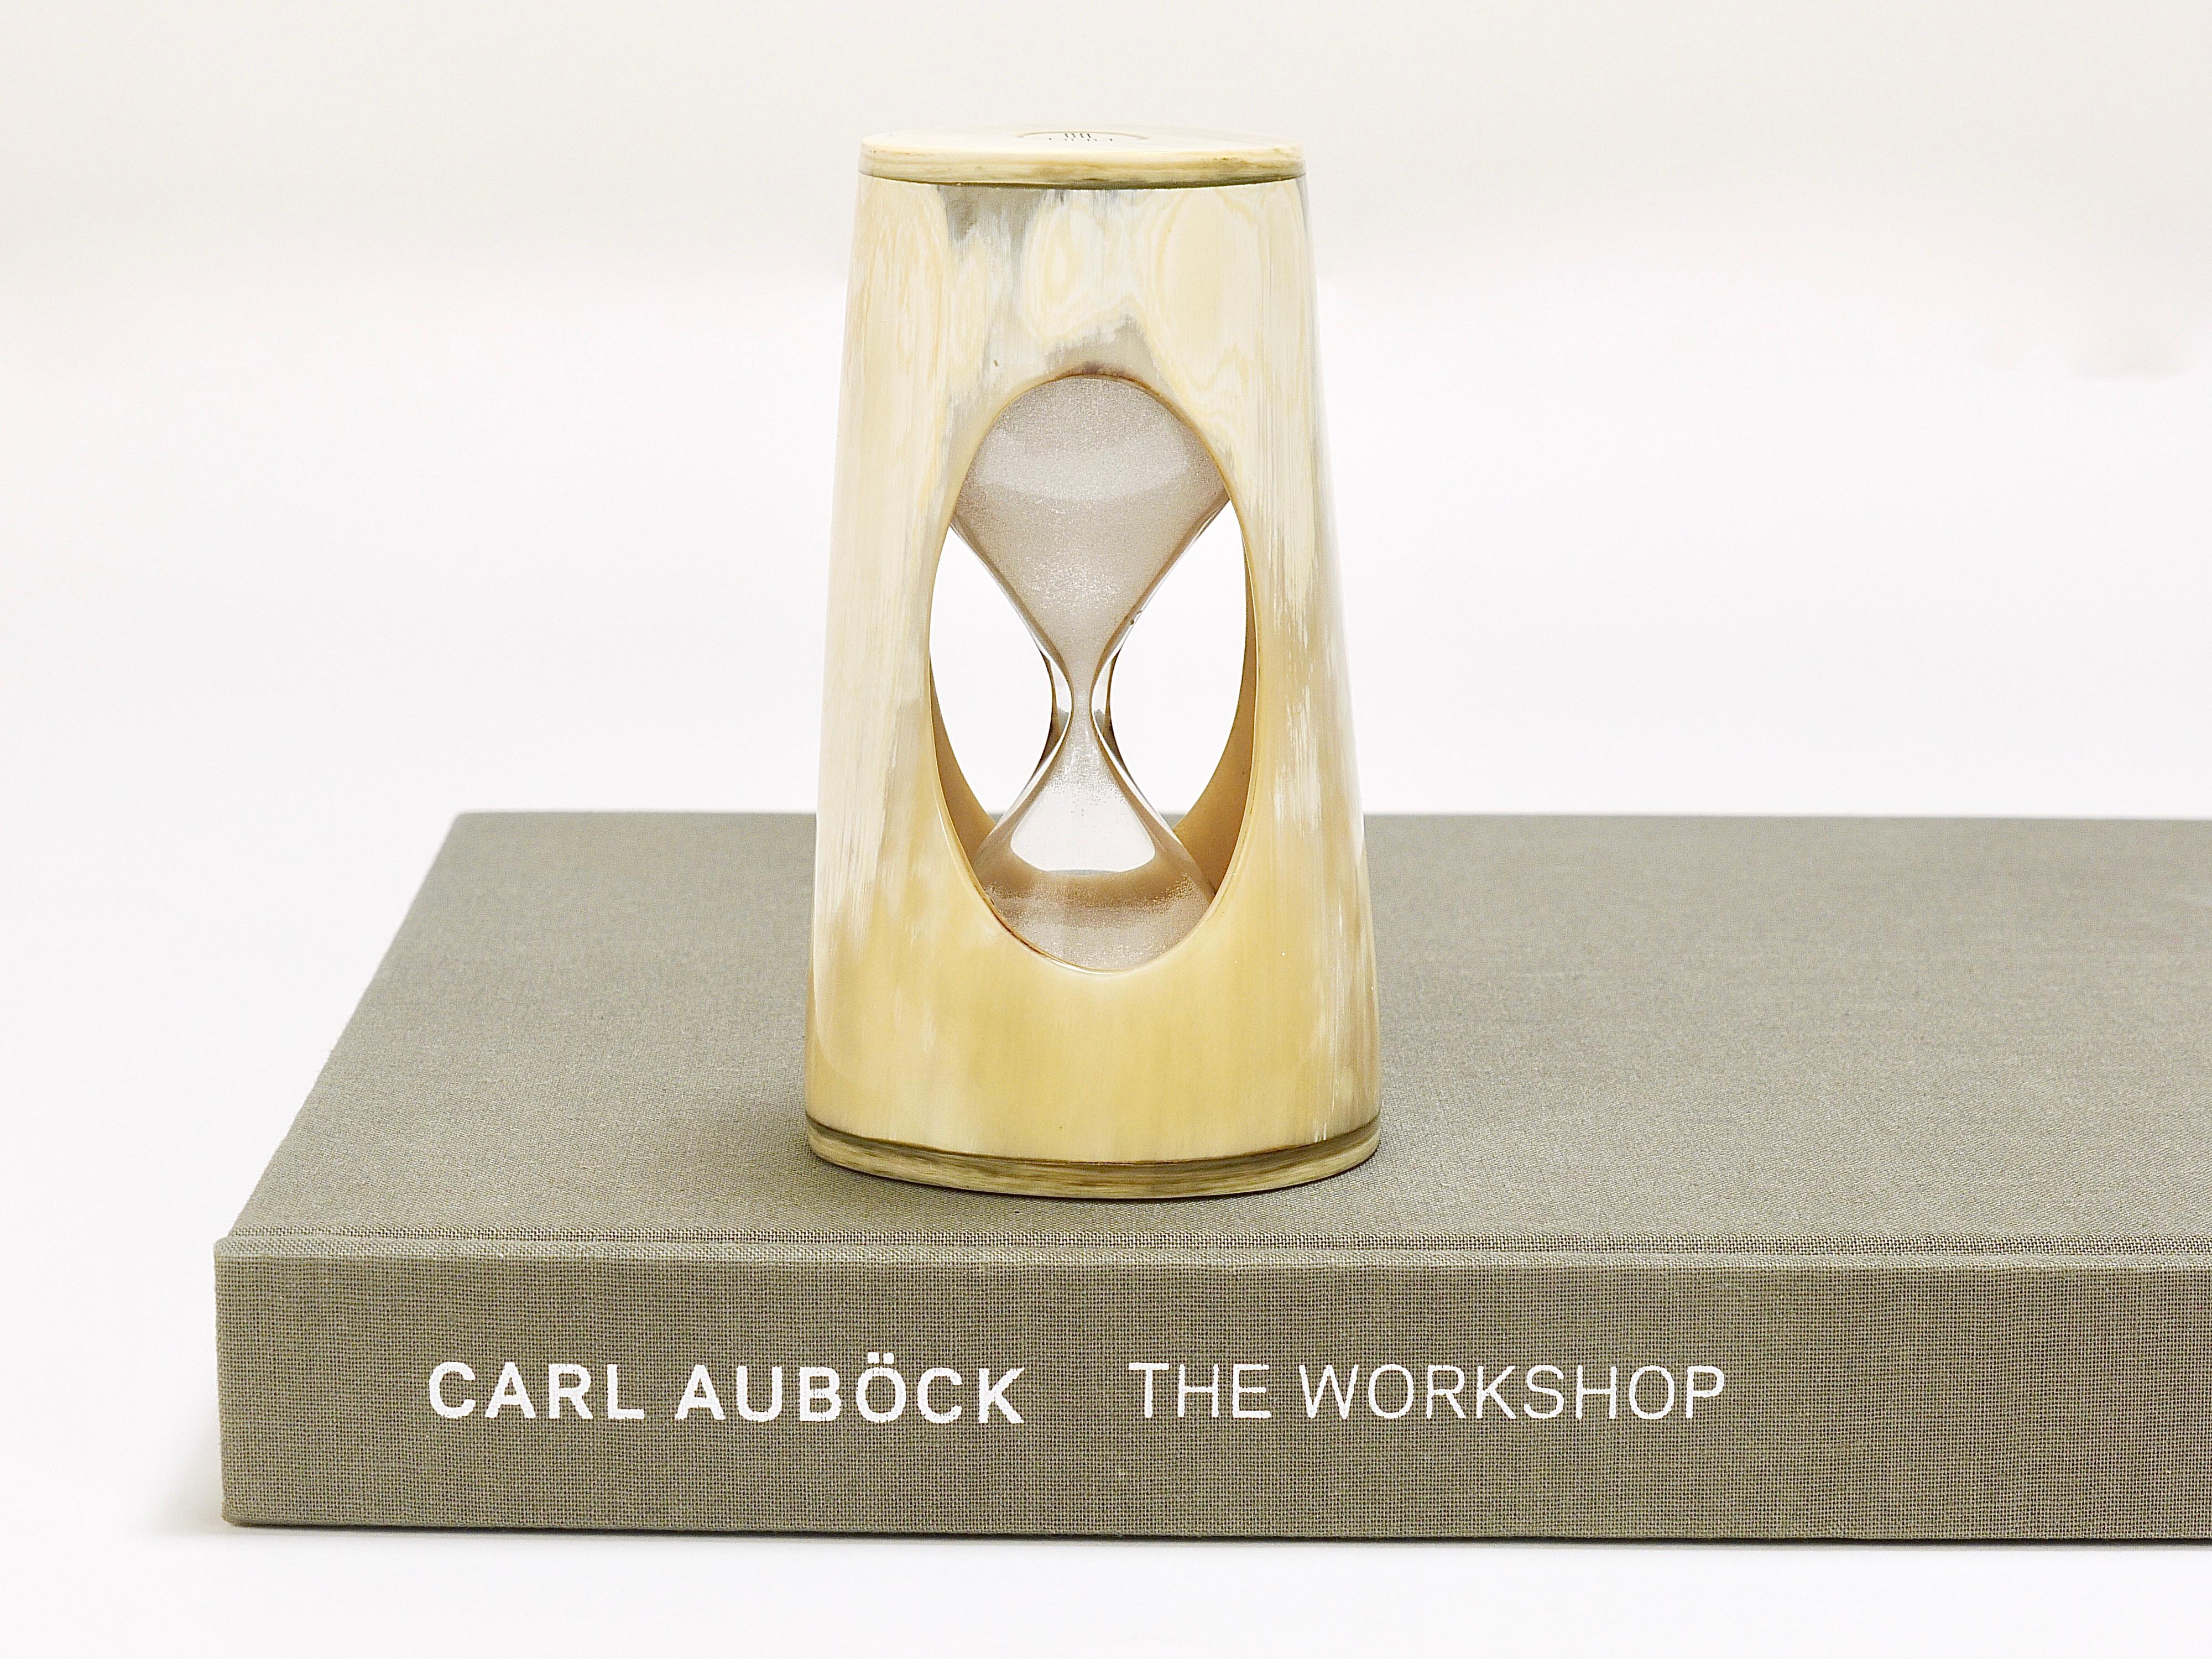 A beautiful and rare modernist hour glass / sand clock / egg timer from the 1950s. Designed and executed by Carl Aubock, Vienna / Austria. A decorative piece, made of light shiny cow horn with lovely grain. In very good condition.